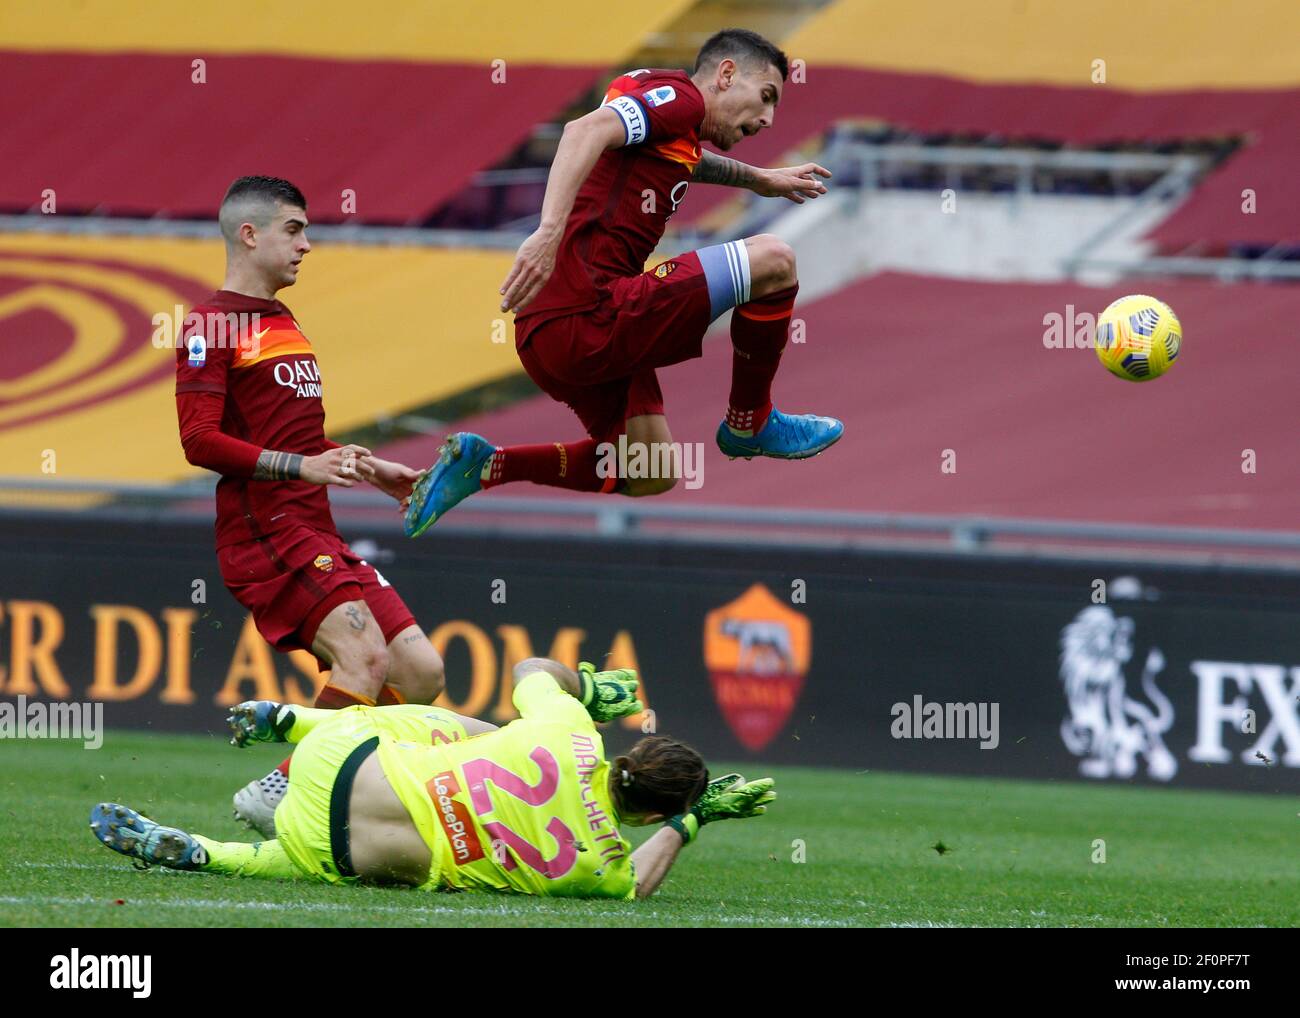 Rome, Italy. 07th Mar, 2021. RomaÕs Lorenzo Pellegrini, right, jumps over Genoa's goalkeeper Federico Marchetti, bottom, past RomaÕs Gianluca Mancini, during the Italian Serie A Football match between Roma and Genoa at the Olympic stadium. Credit: Riccardo De Luca - Update Images/Alamy Live News Stock Photo